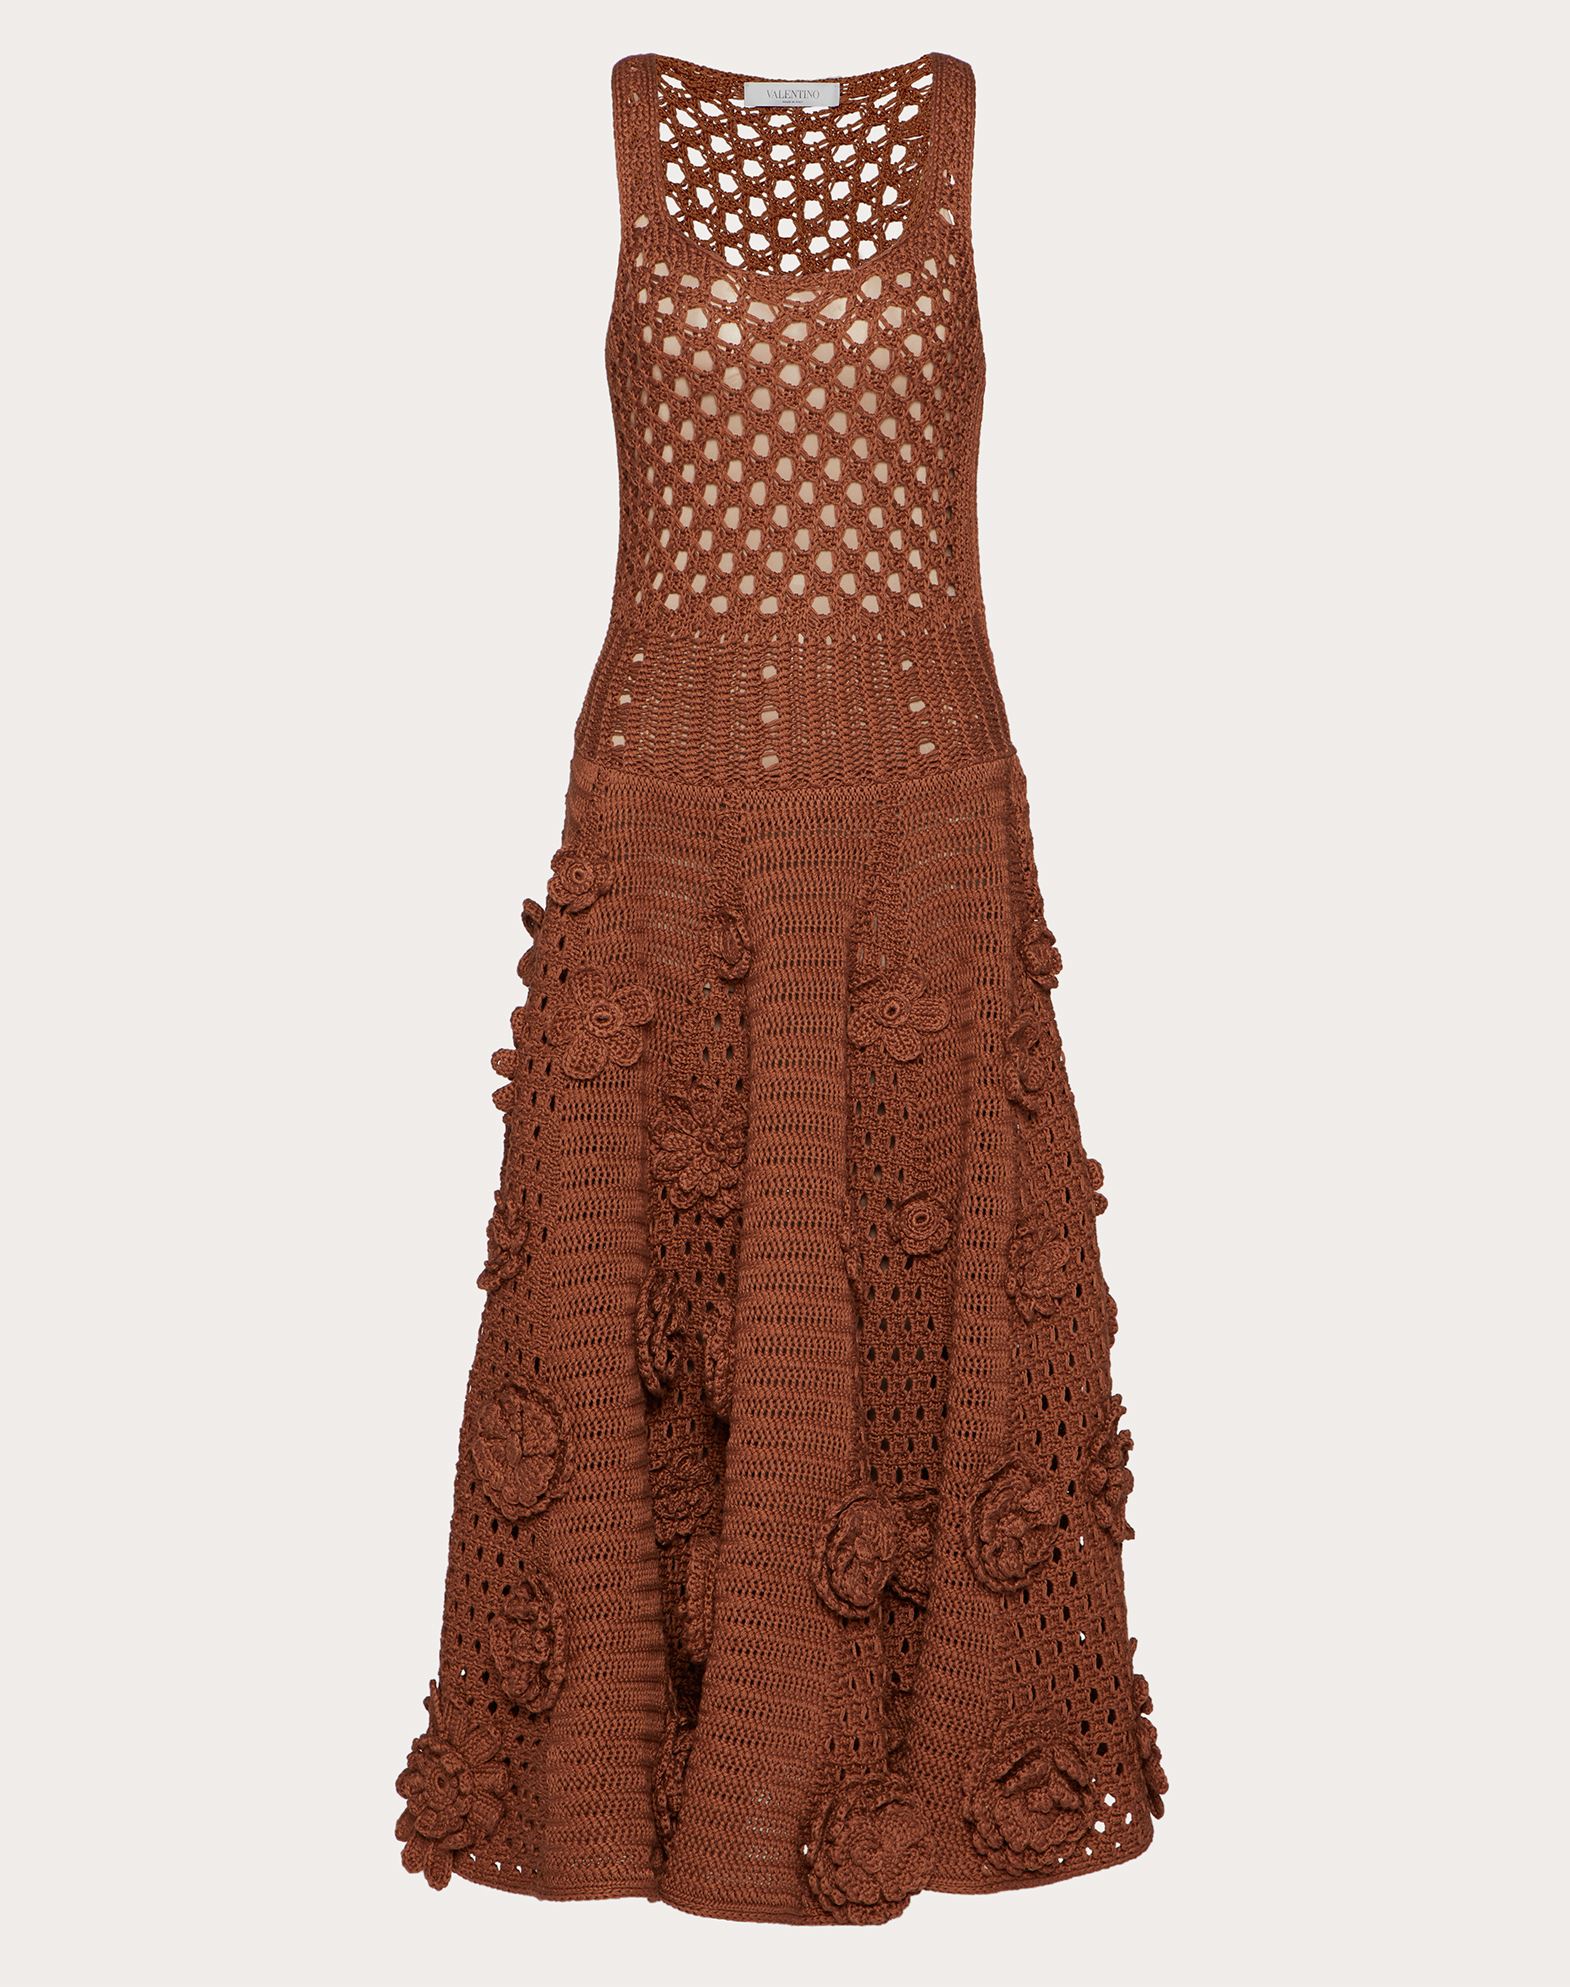 VALENTINO VALENTINO EMBROIDERED COTTON KNITTED DRESS